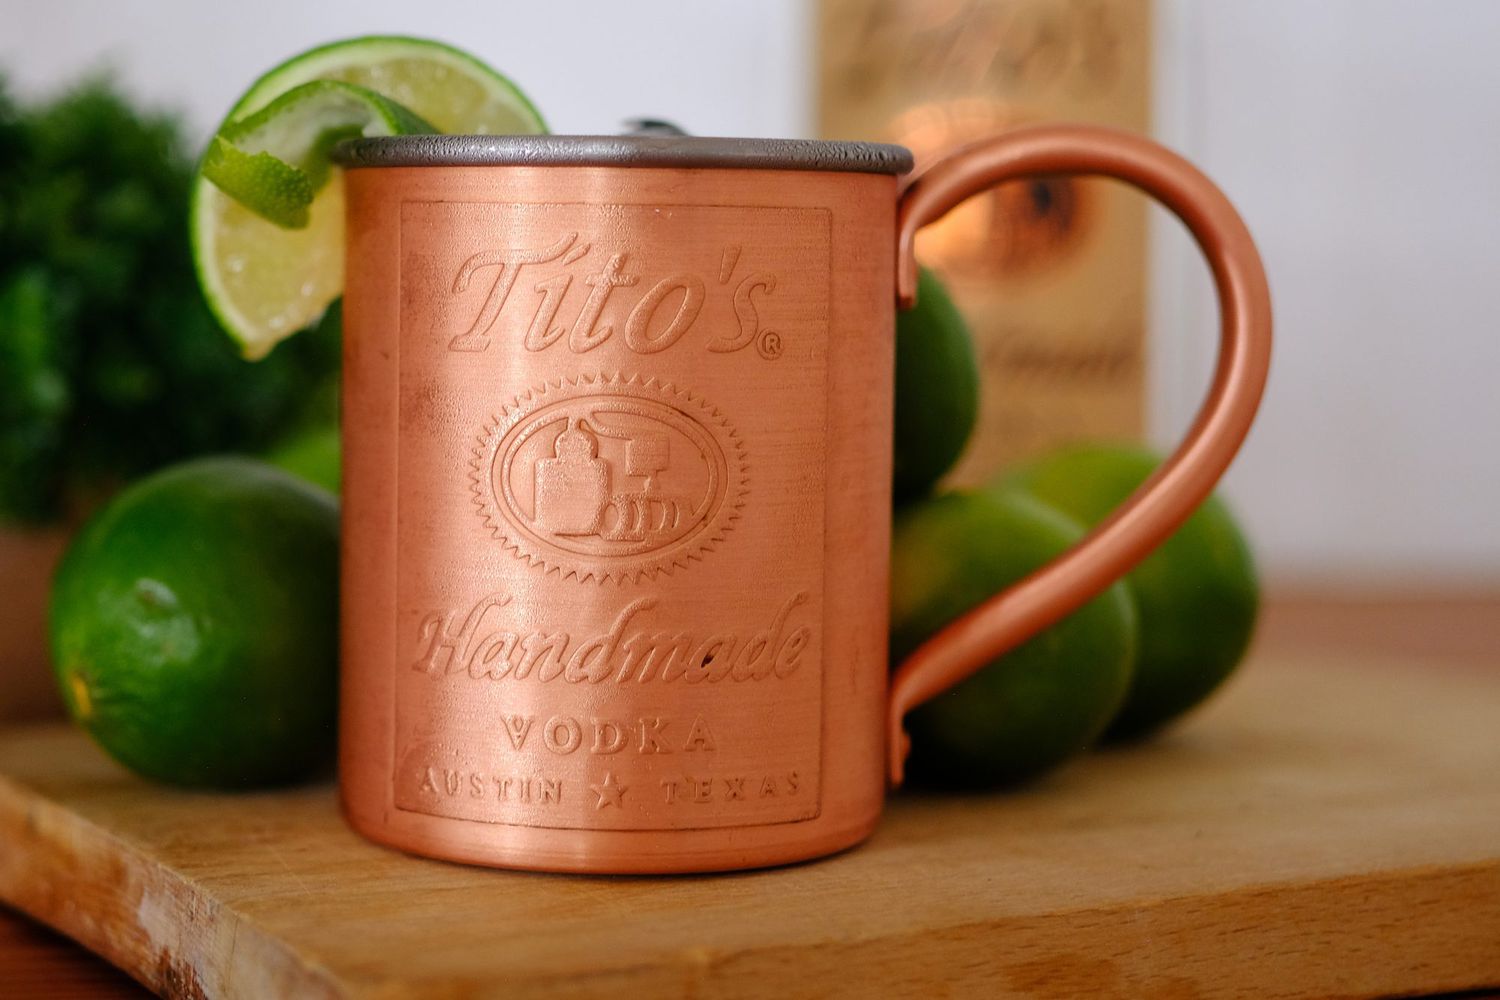 side view of a copper mug from Tito's Handmade Vodka garnished with a lime wedge